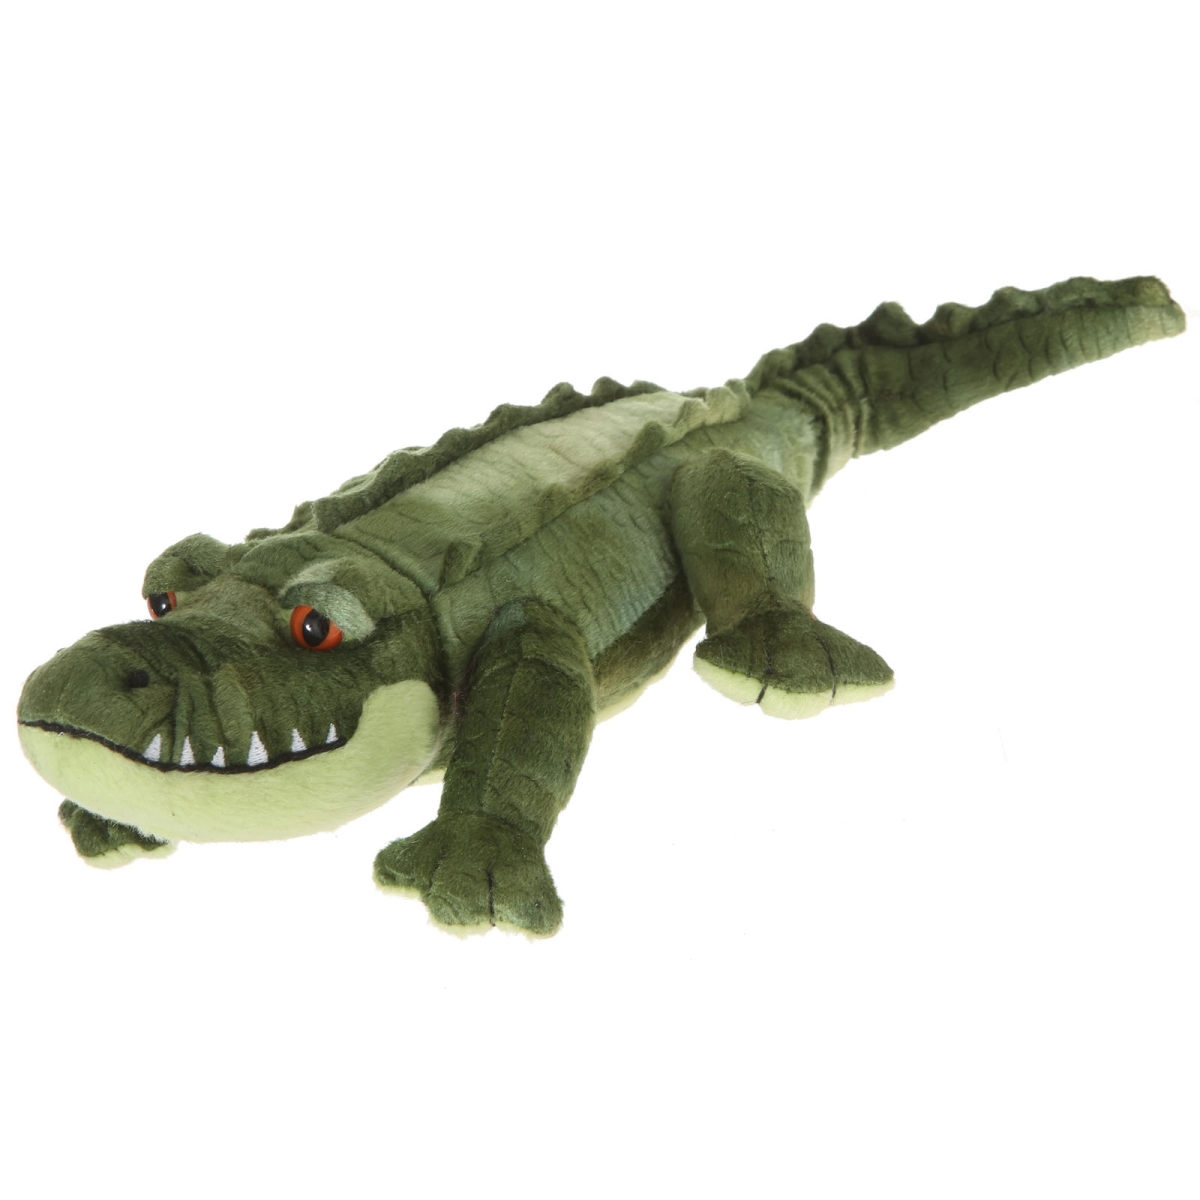 Picture of Giftable World A15018 14 in. Plush Alligator - Green